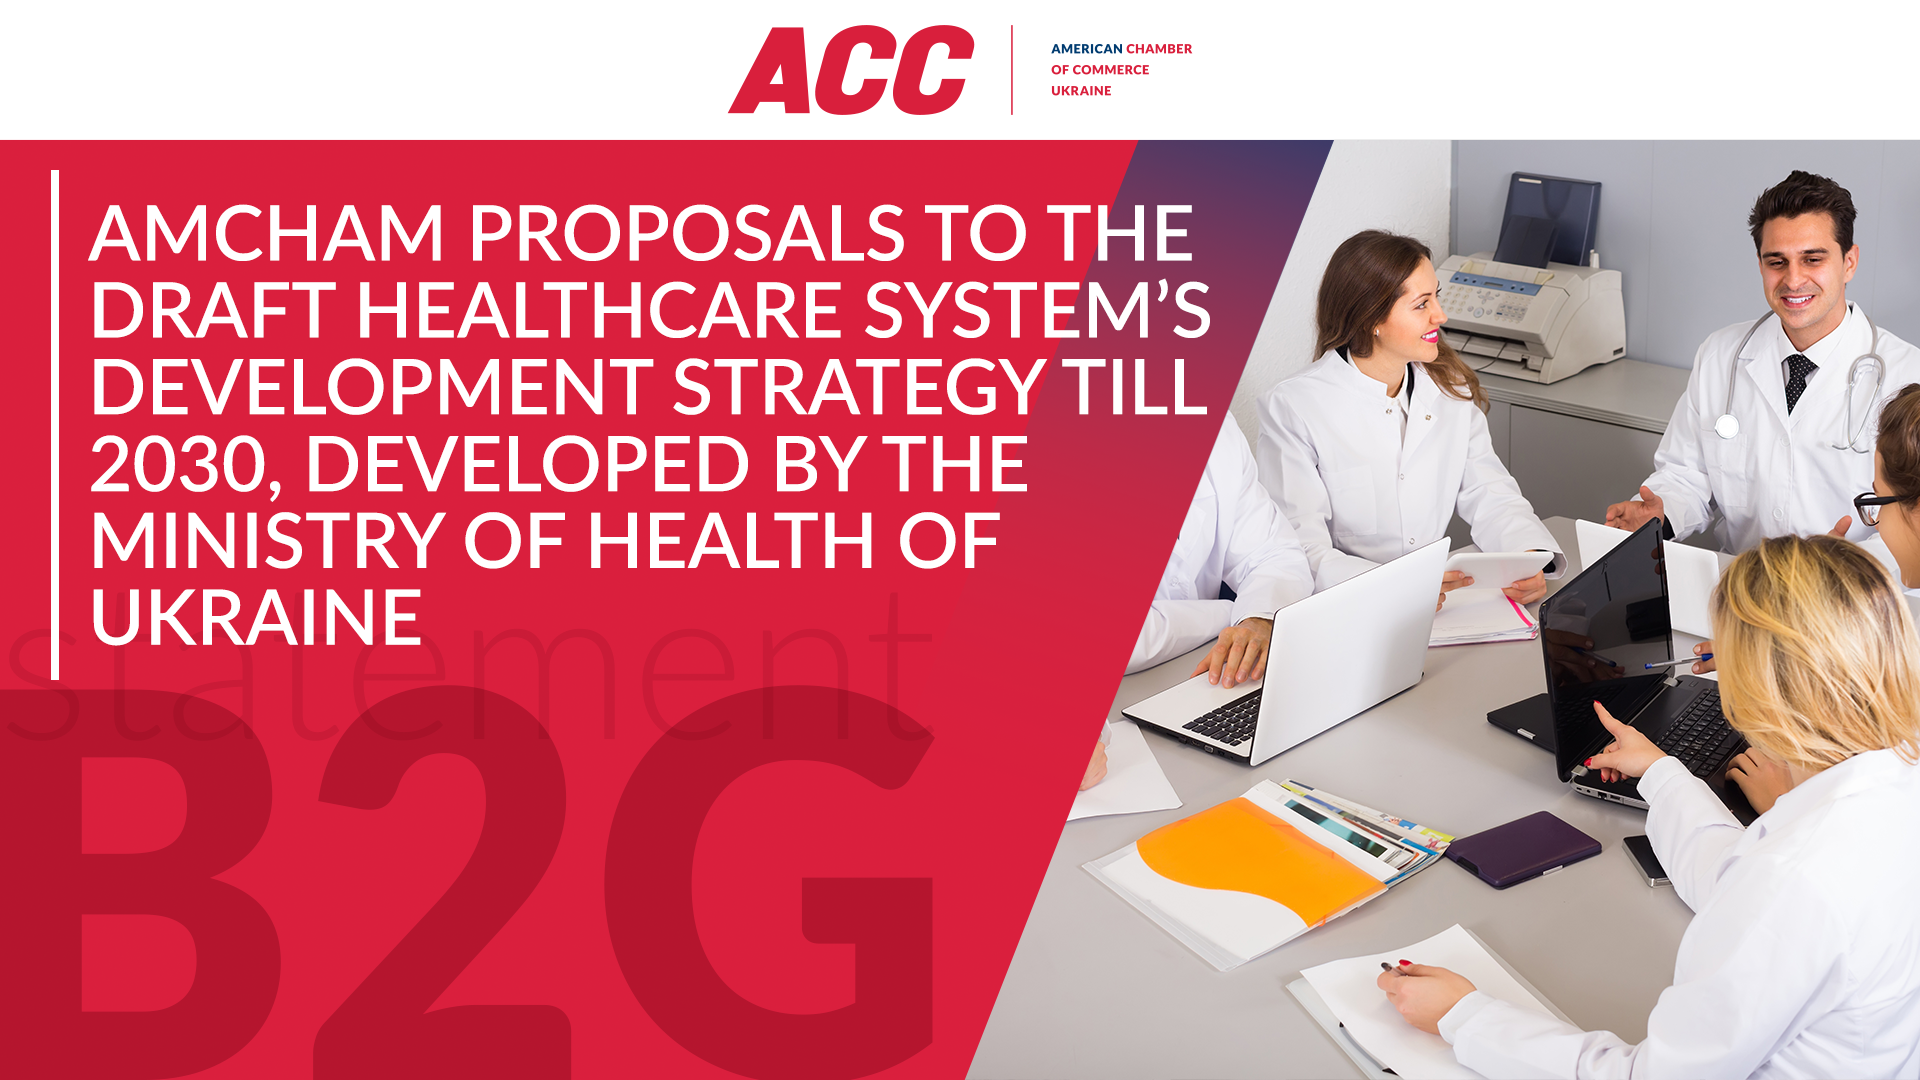 AmCham Proposals to the Draft Healthcare System’s Development Strategy till 2030, Developed by the Ministry of Health of Ukraine